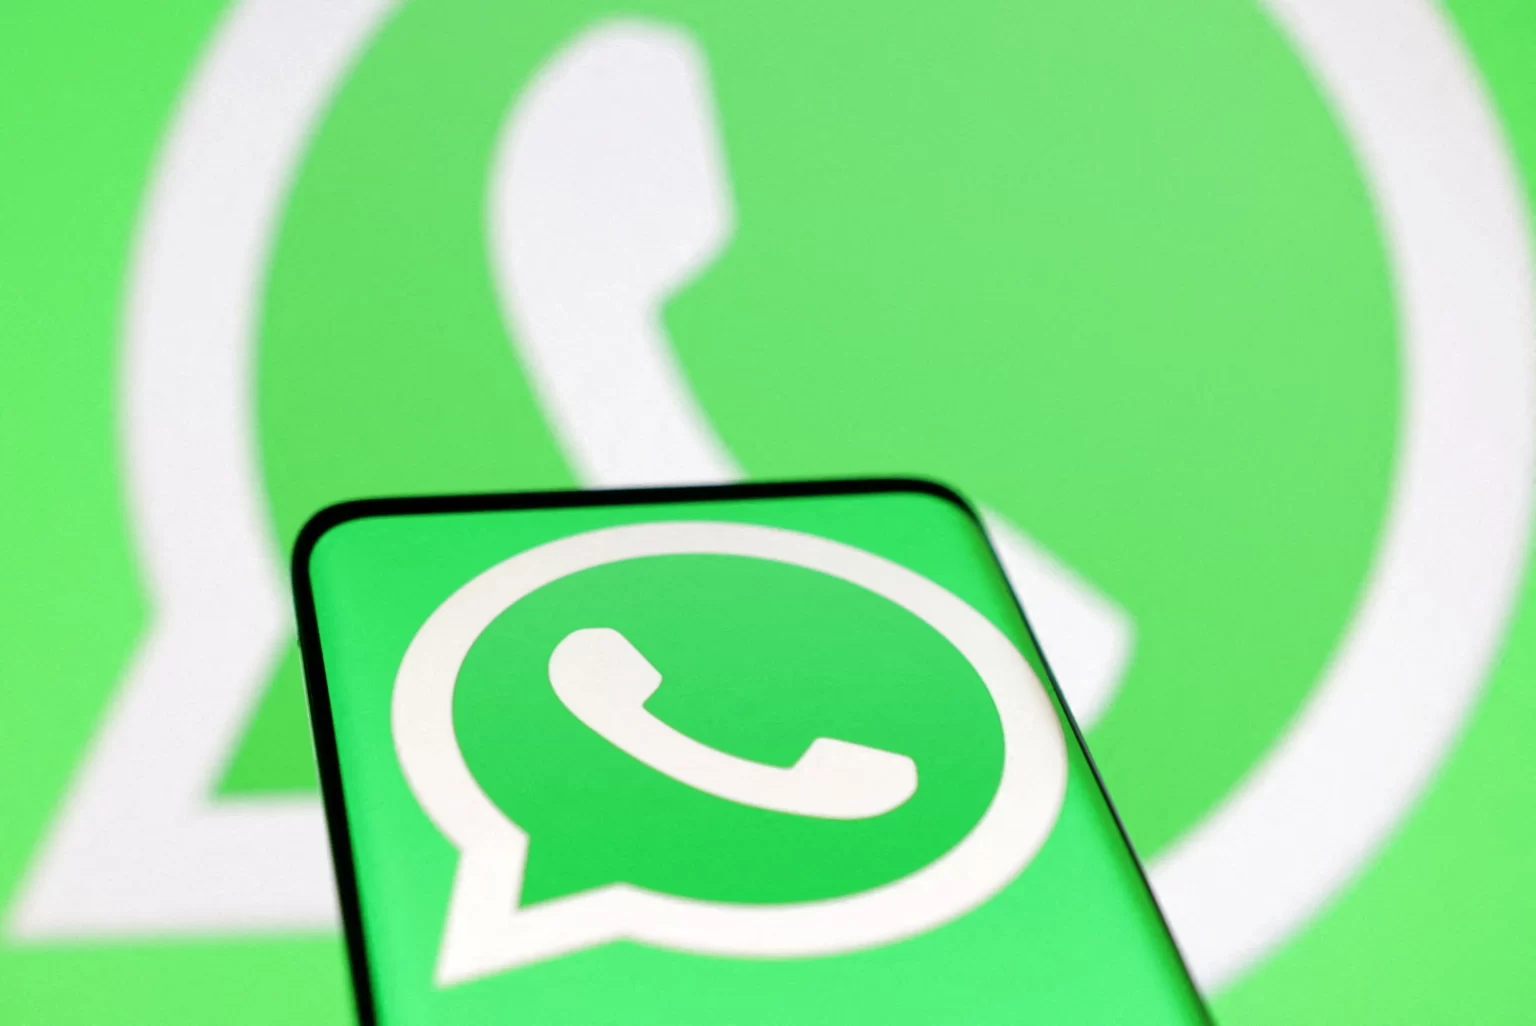 6ESDZ4G3FRLP7DKILRJUCEW2WI 1536x1026 - WhatsApp launches free proxy support for users globally